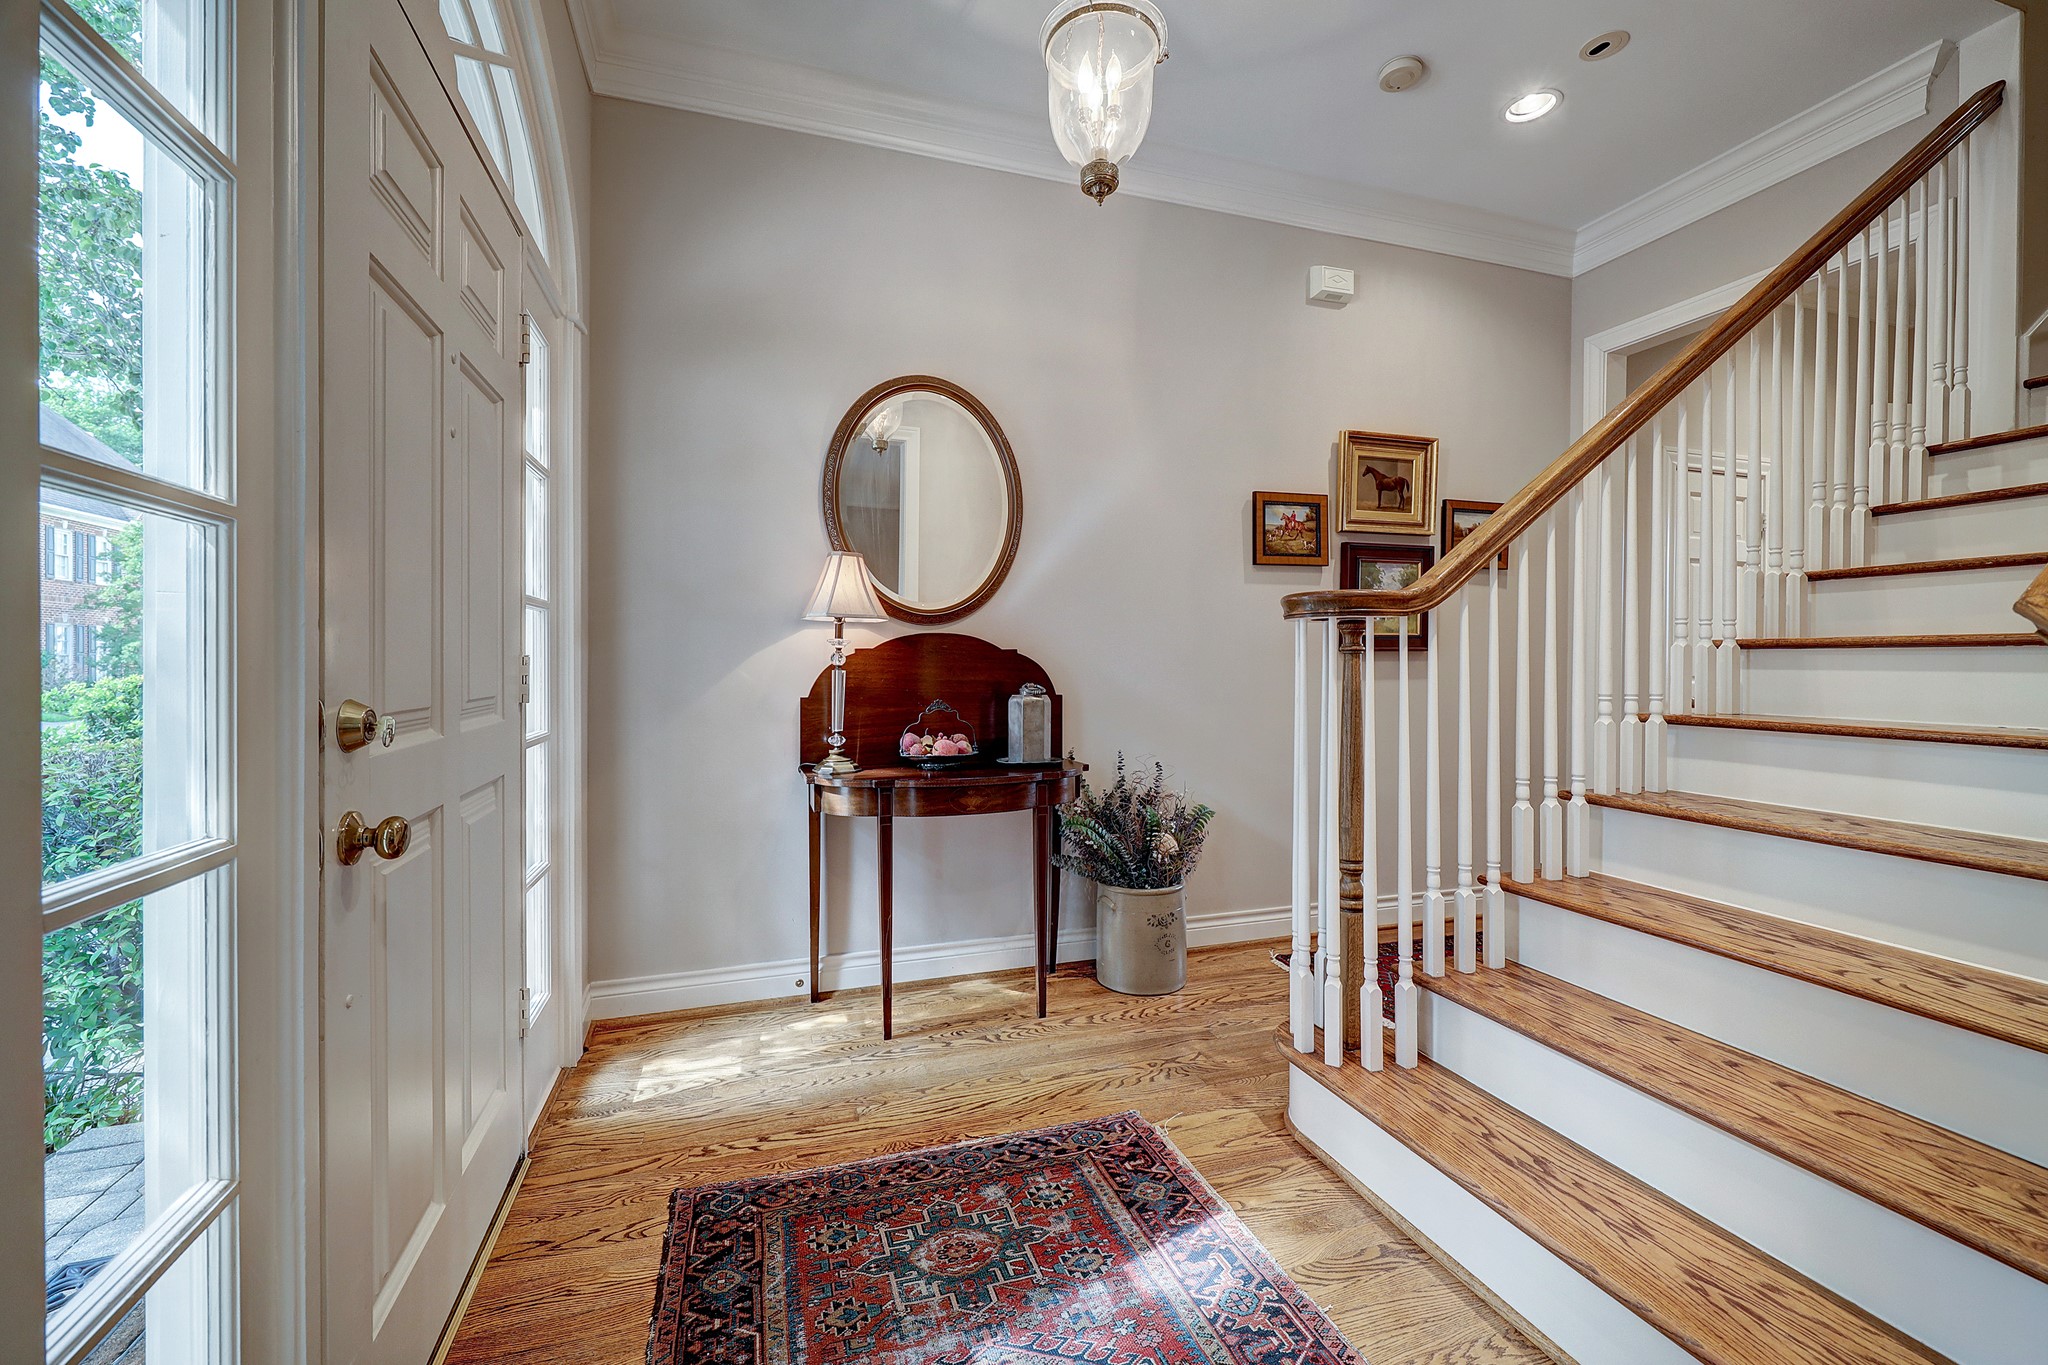 Note the gorgeous hardwood floors, high ceilings and beautiful lighting fixtures.